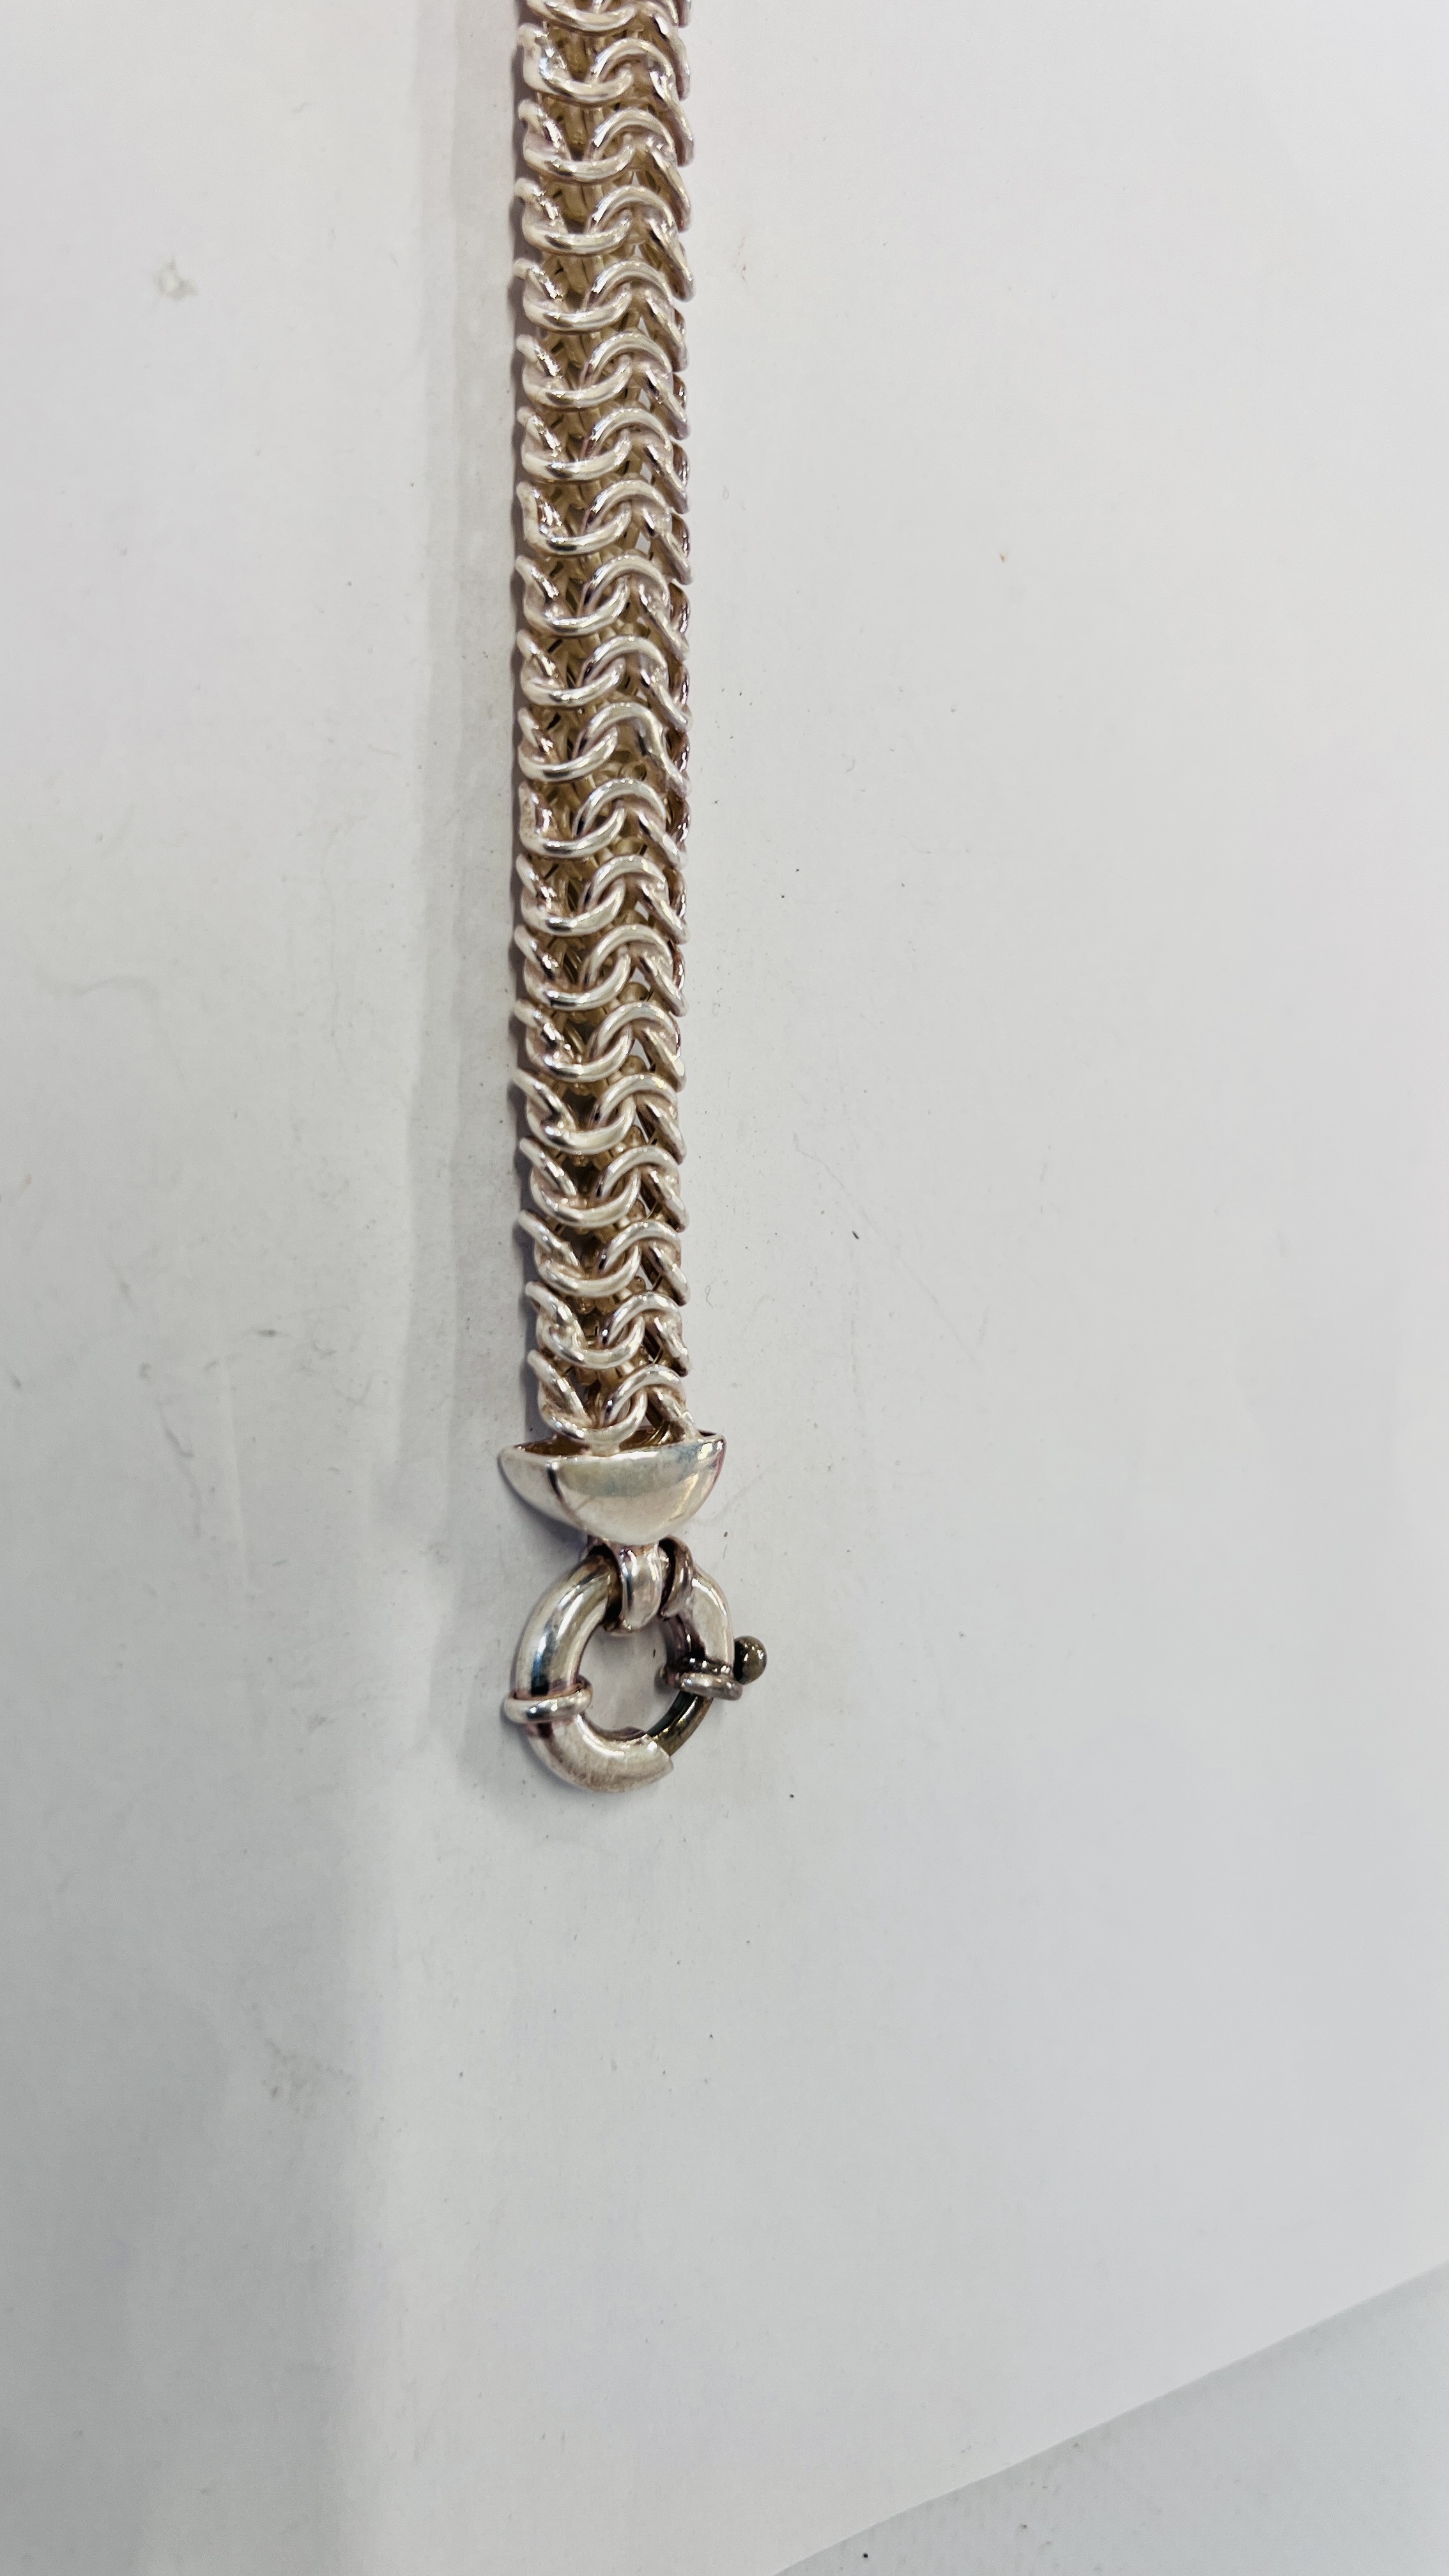 BOXED SILVER WOVEN BRACELET. - Image 3 of 7